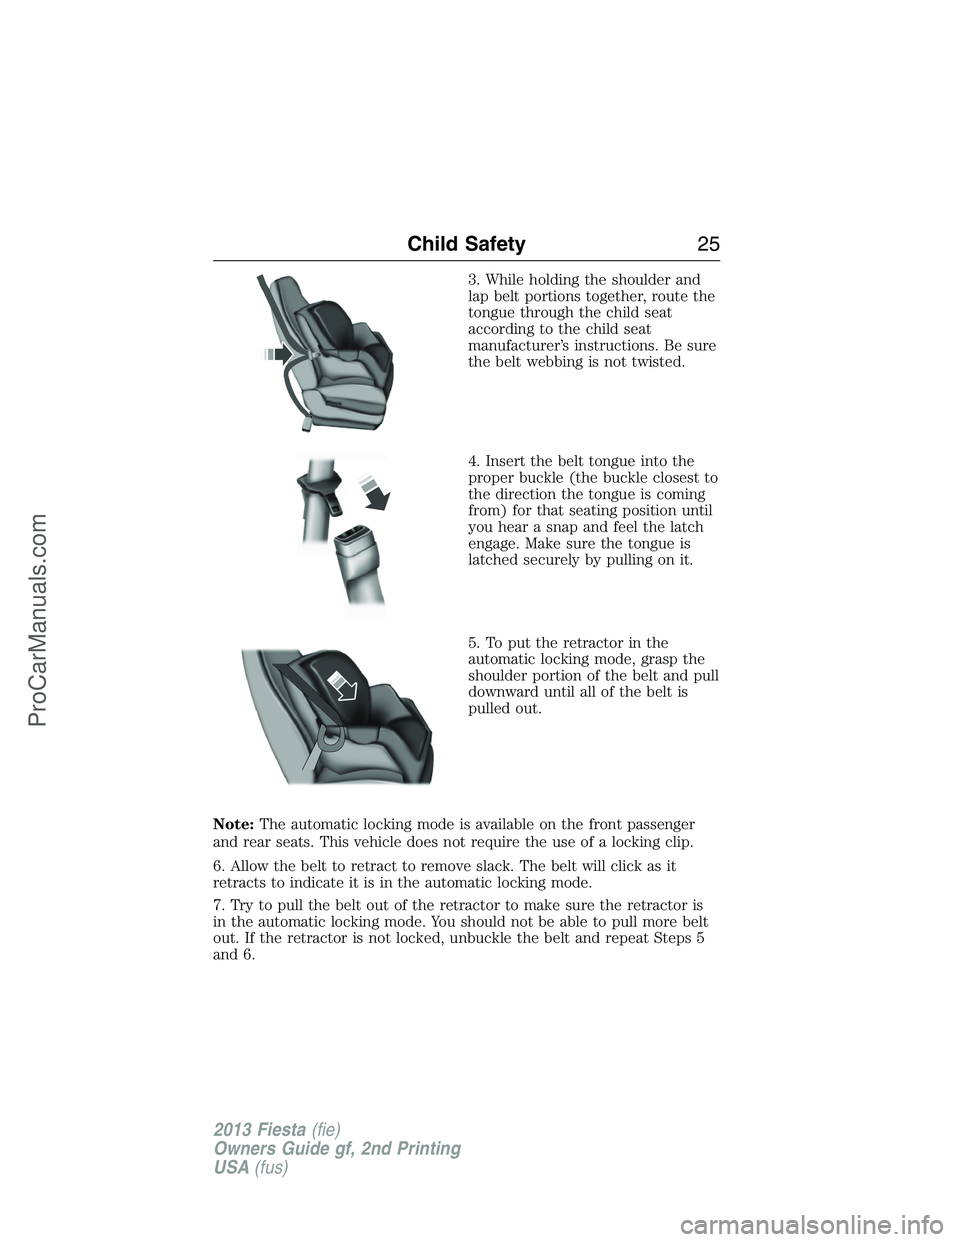 FORD FIESTA 2013  Owners Manual 3. While holding the shoulder and
lap belt portions together, route the
tongue through the child seat
according to the child seat
manufacturer’s instructions. Be sure
the belt webbing is not twisted